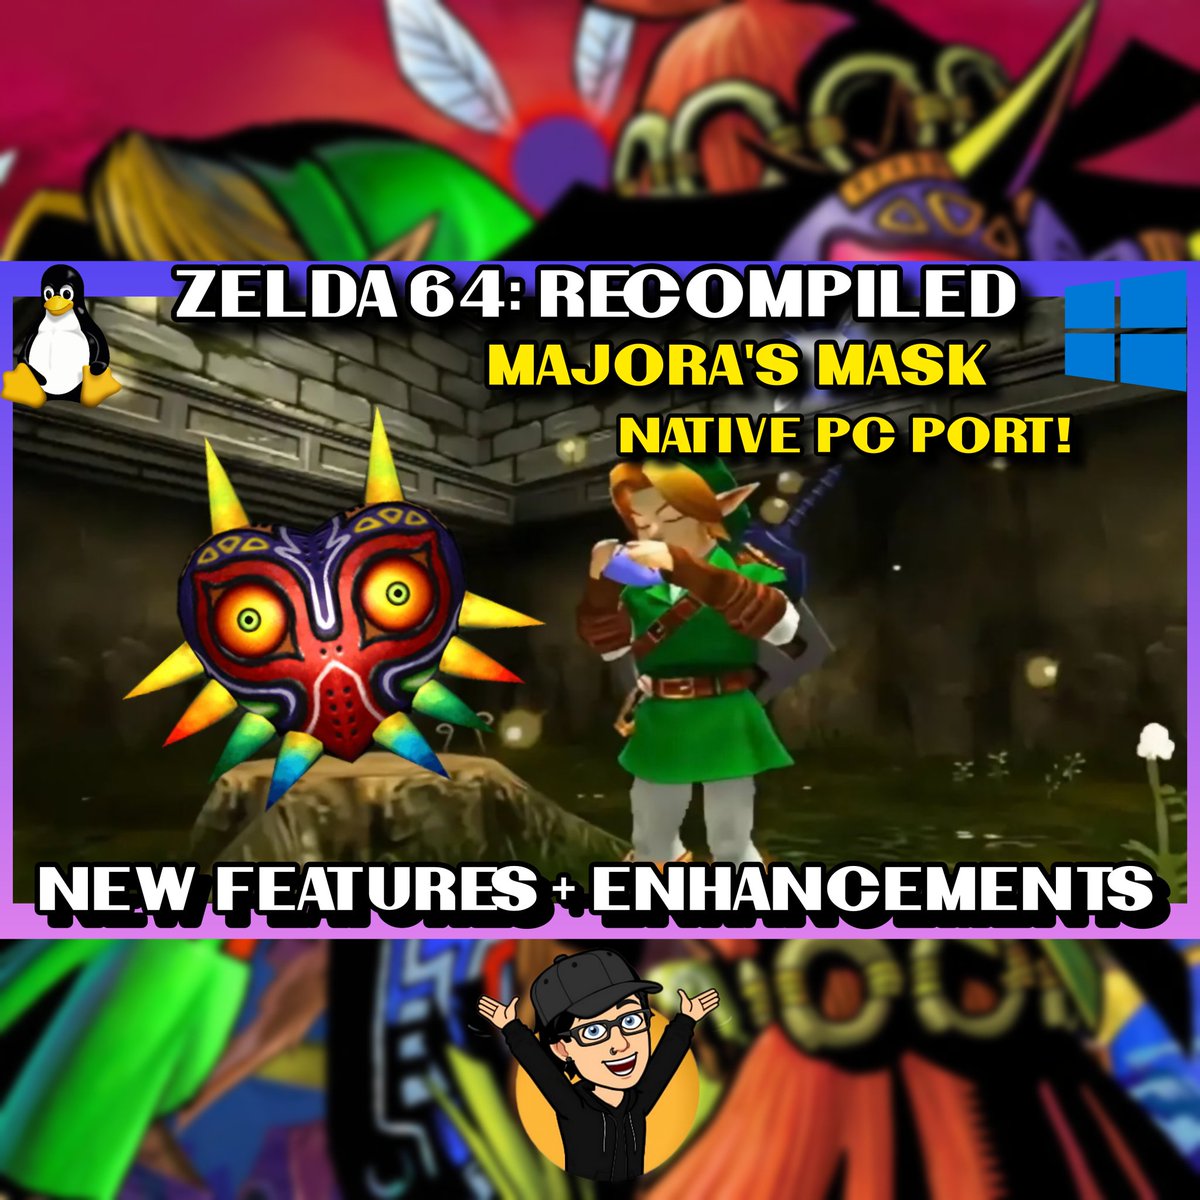 Today, we are checking out an incredible project that essentially turns N64 games into PC ports complete with settings screen and major video enhancements. If you are an old school Zelda fan. youtu.be/NdReArrPmm0?si… #majorasmask #zelda64 #n64 #justjamie